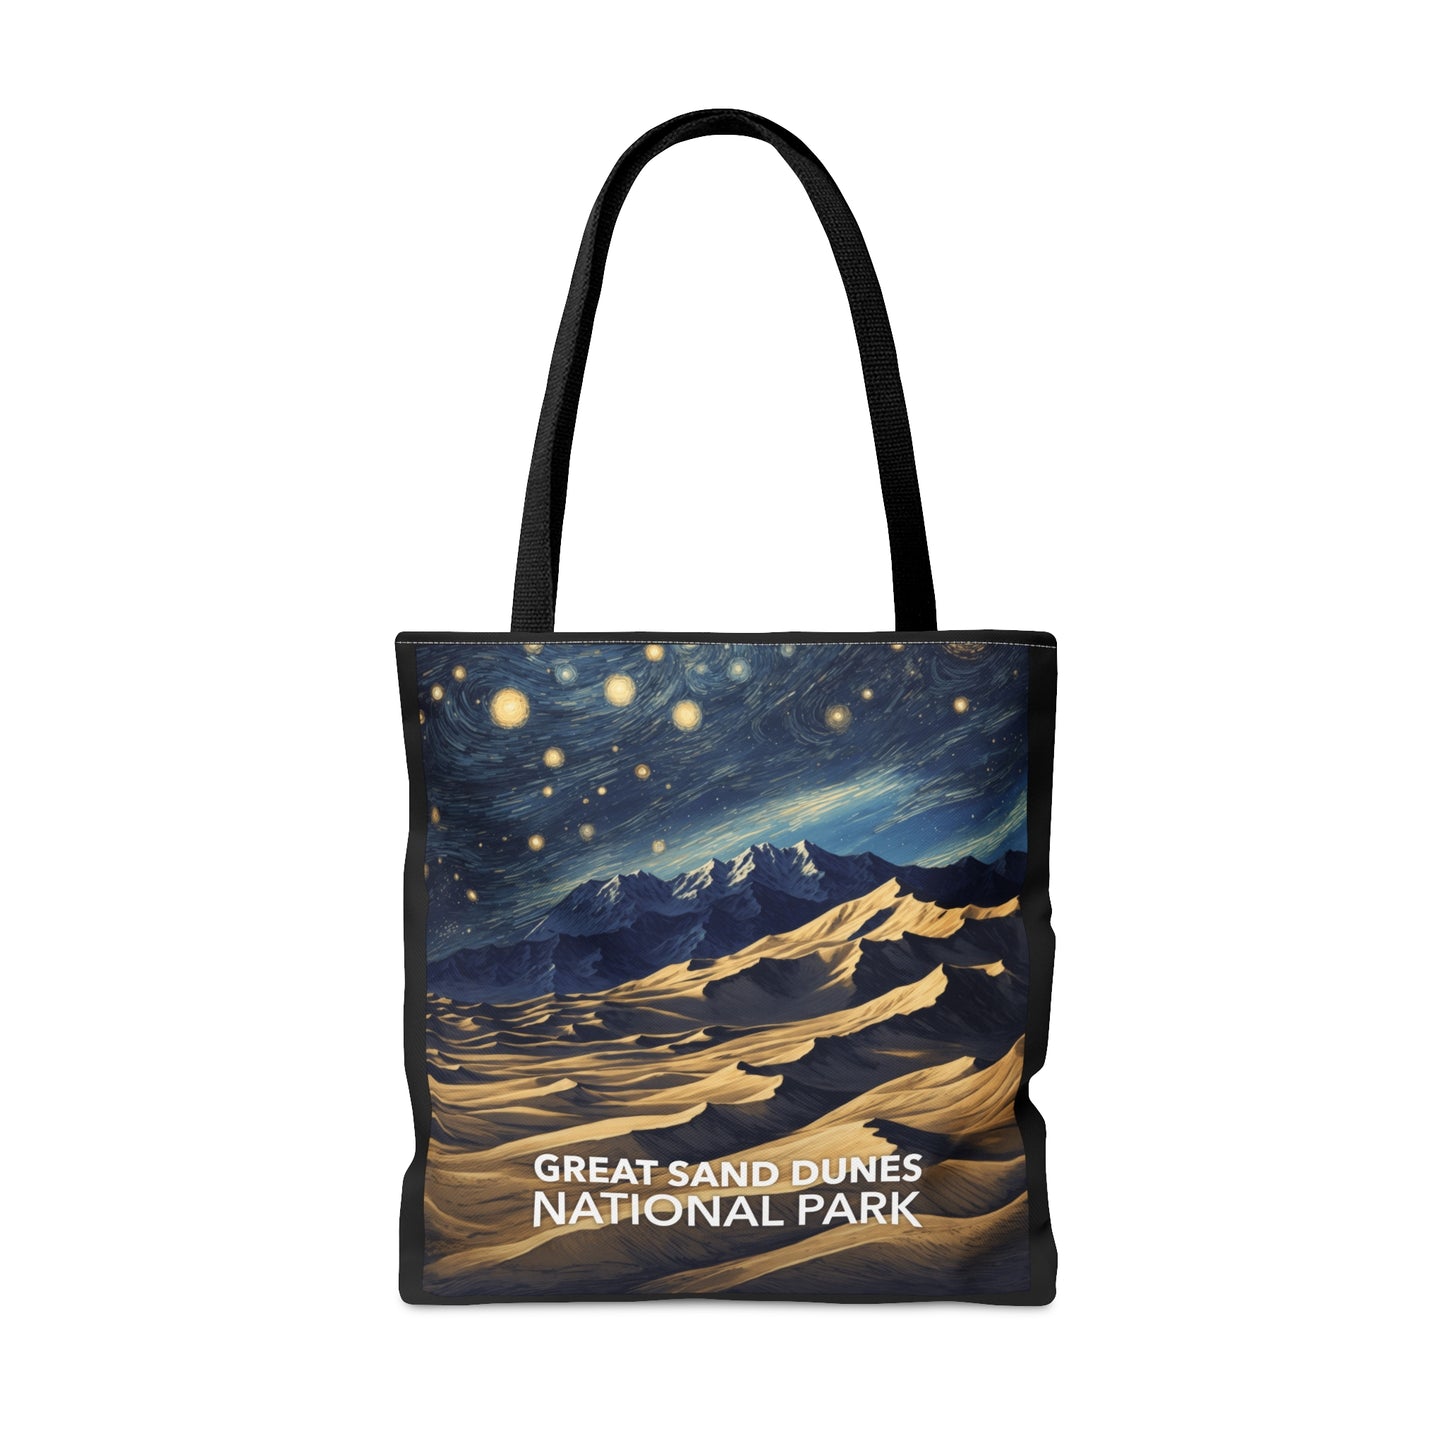 Great Sand Dunes National Park Tote Bag - The Starry Night